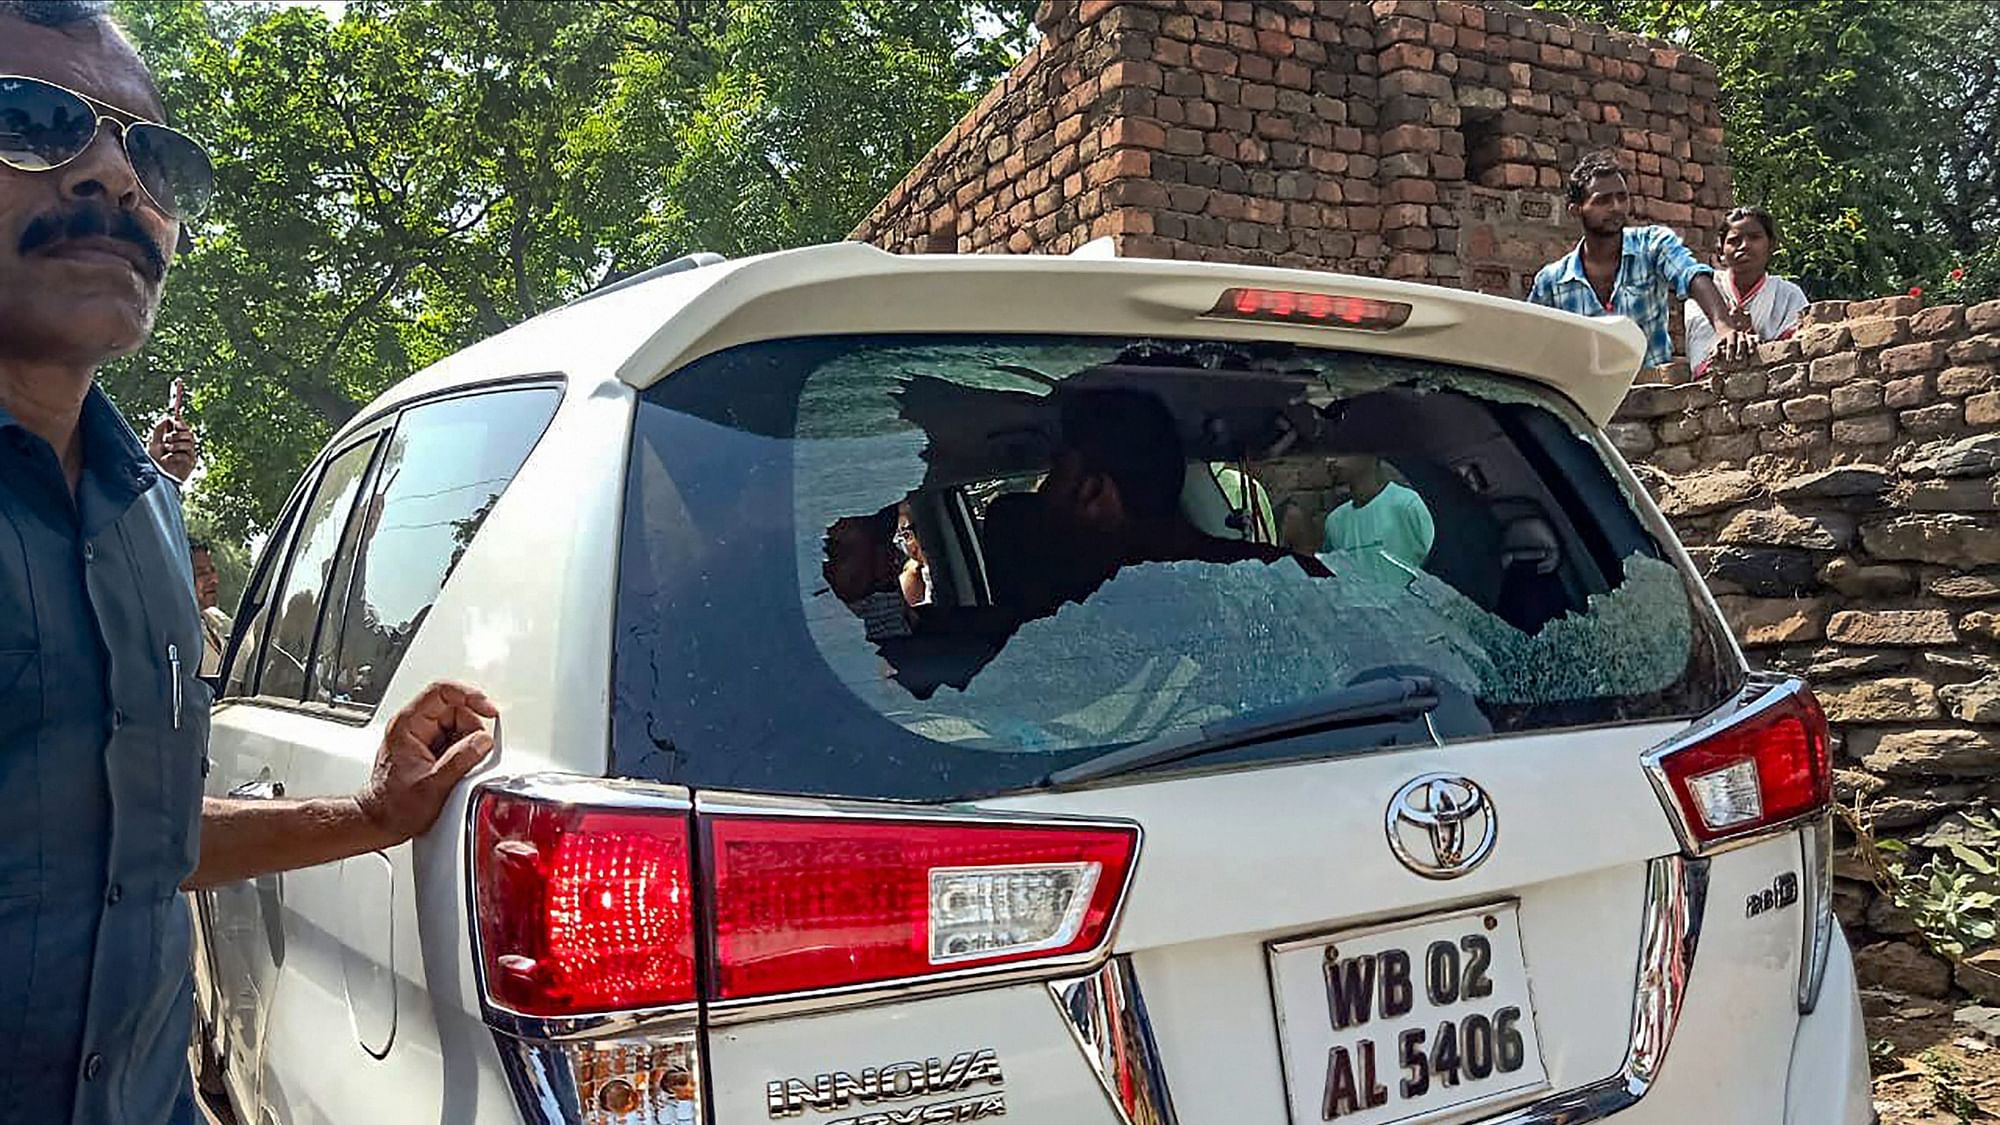 BJP MP Babul Supriyo’s car was vandalised in Asansol in poll-related clashes.